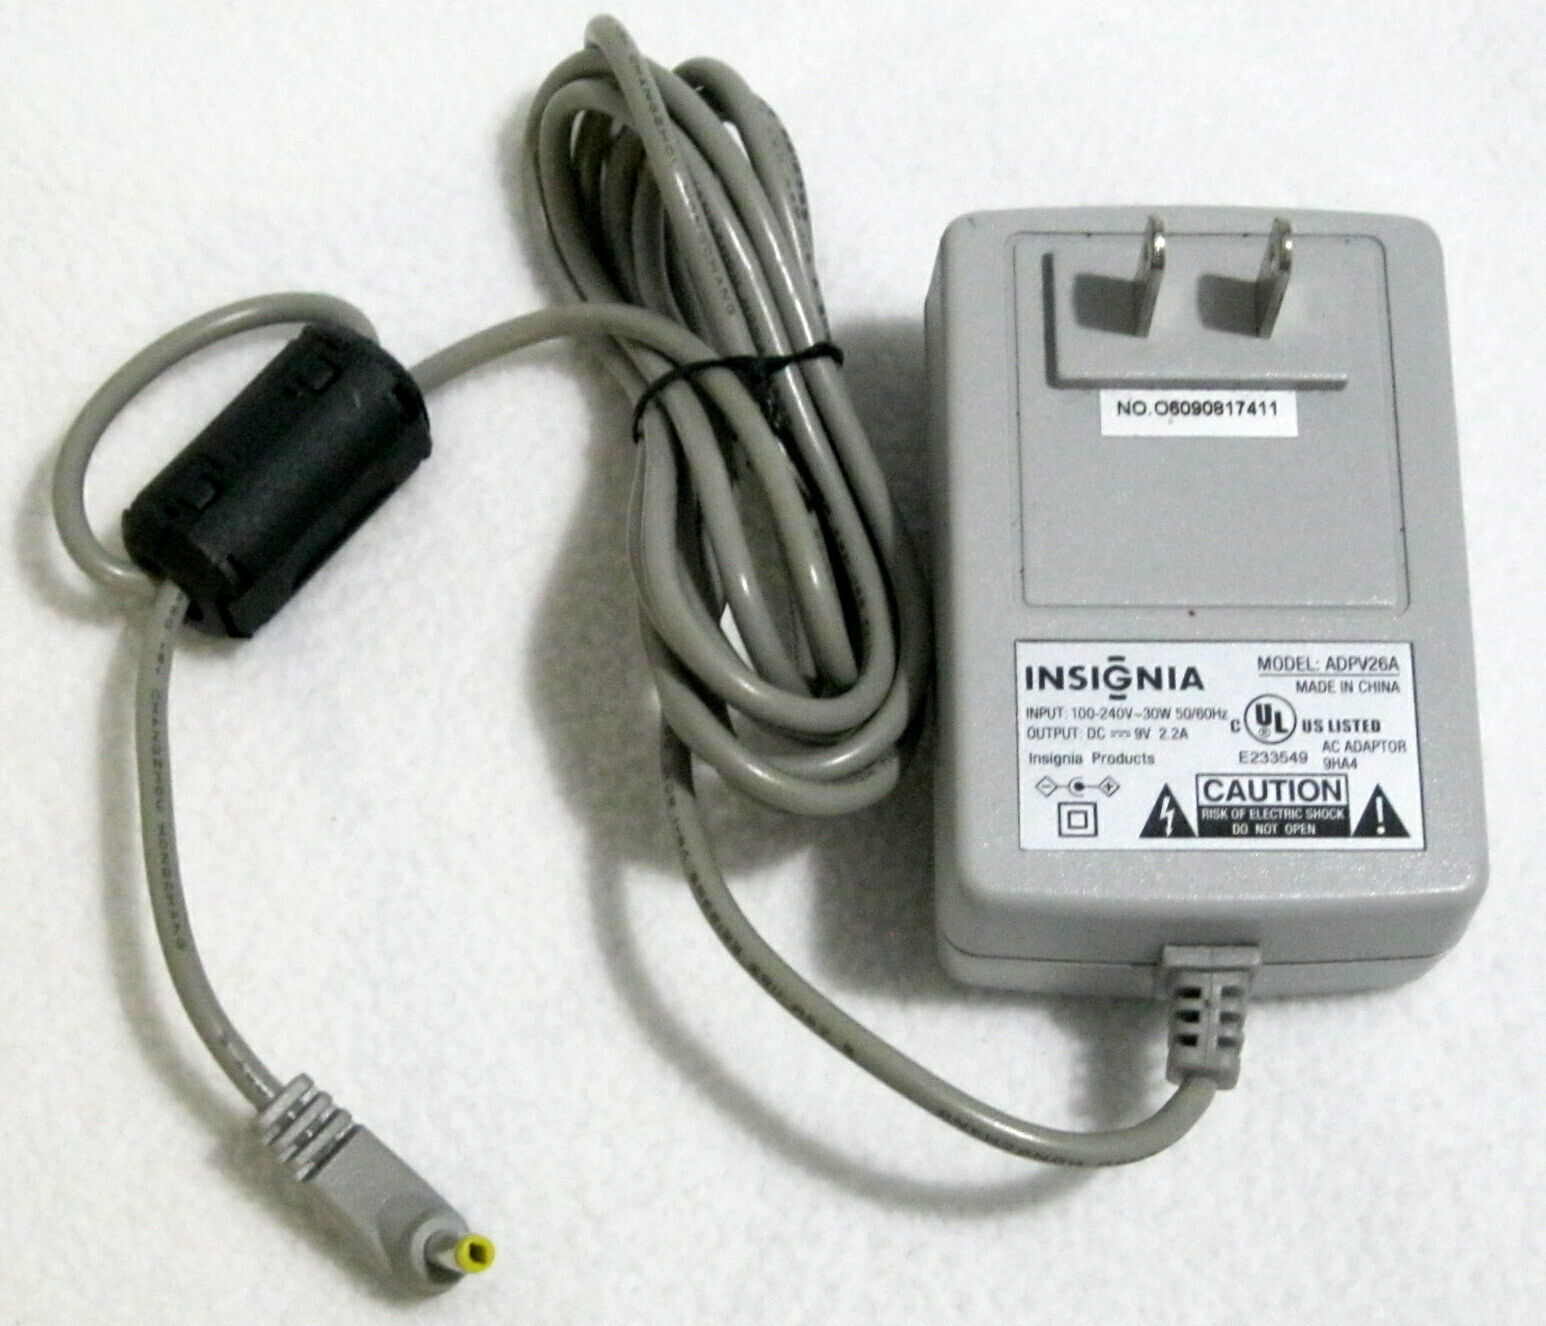 NEW INSIGNIA ADPV26A Switching AC Power Supply Adapter Charger 9V DC 2.2A